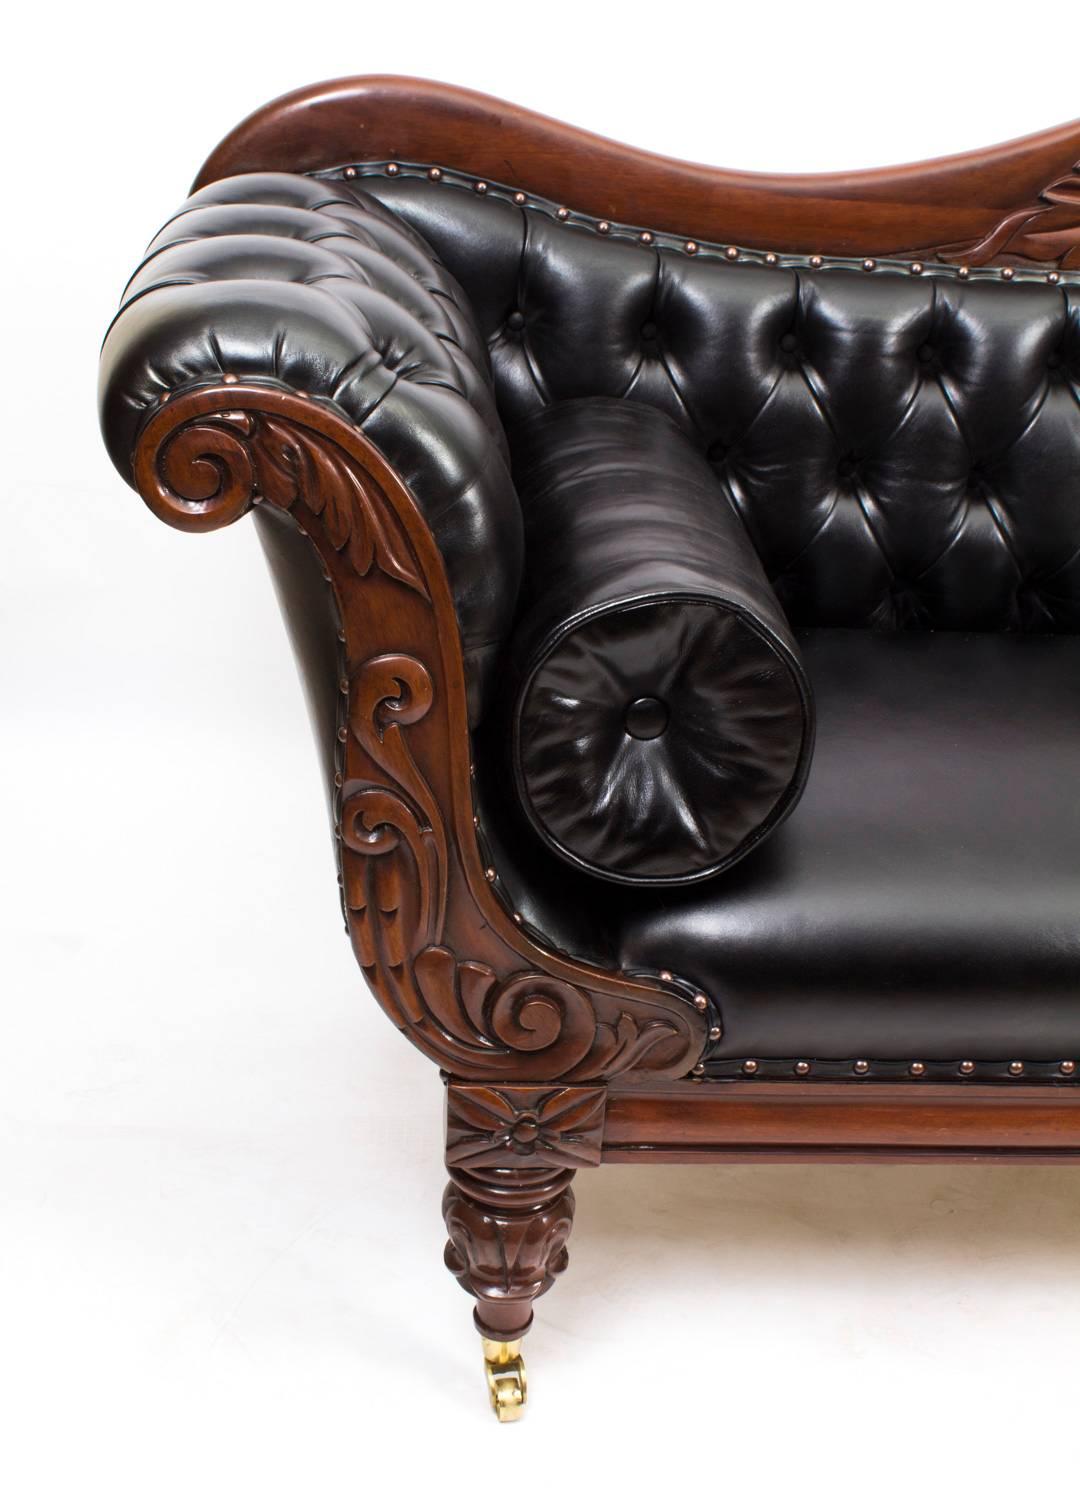 This is a superb quality antique William IV double scroll end mahogany and leather sofa, circa 1830 in date.

At this time, England was importing the best quality mahogany from its colonies, the frame and the baluster turned legs are constructed